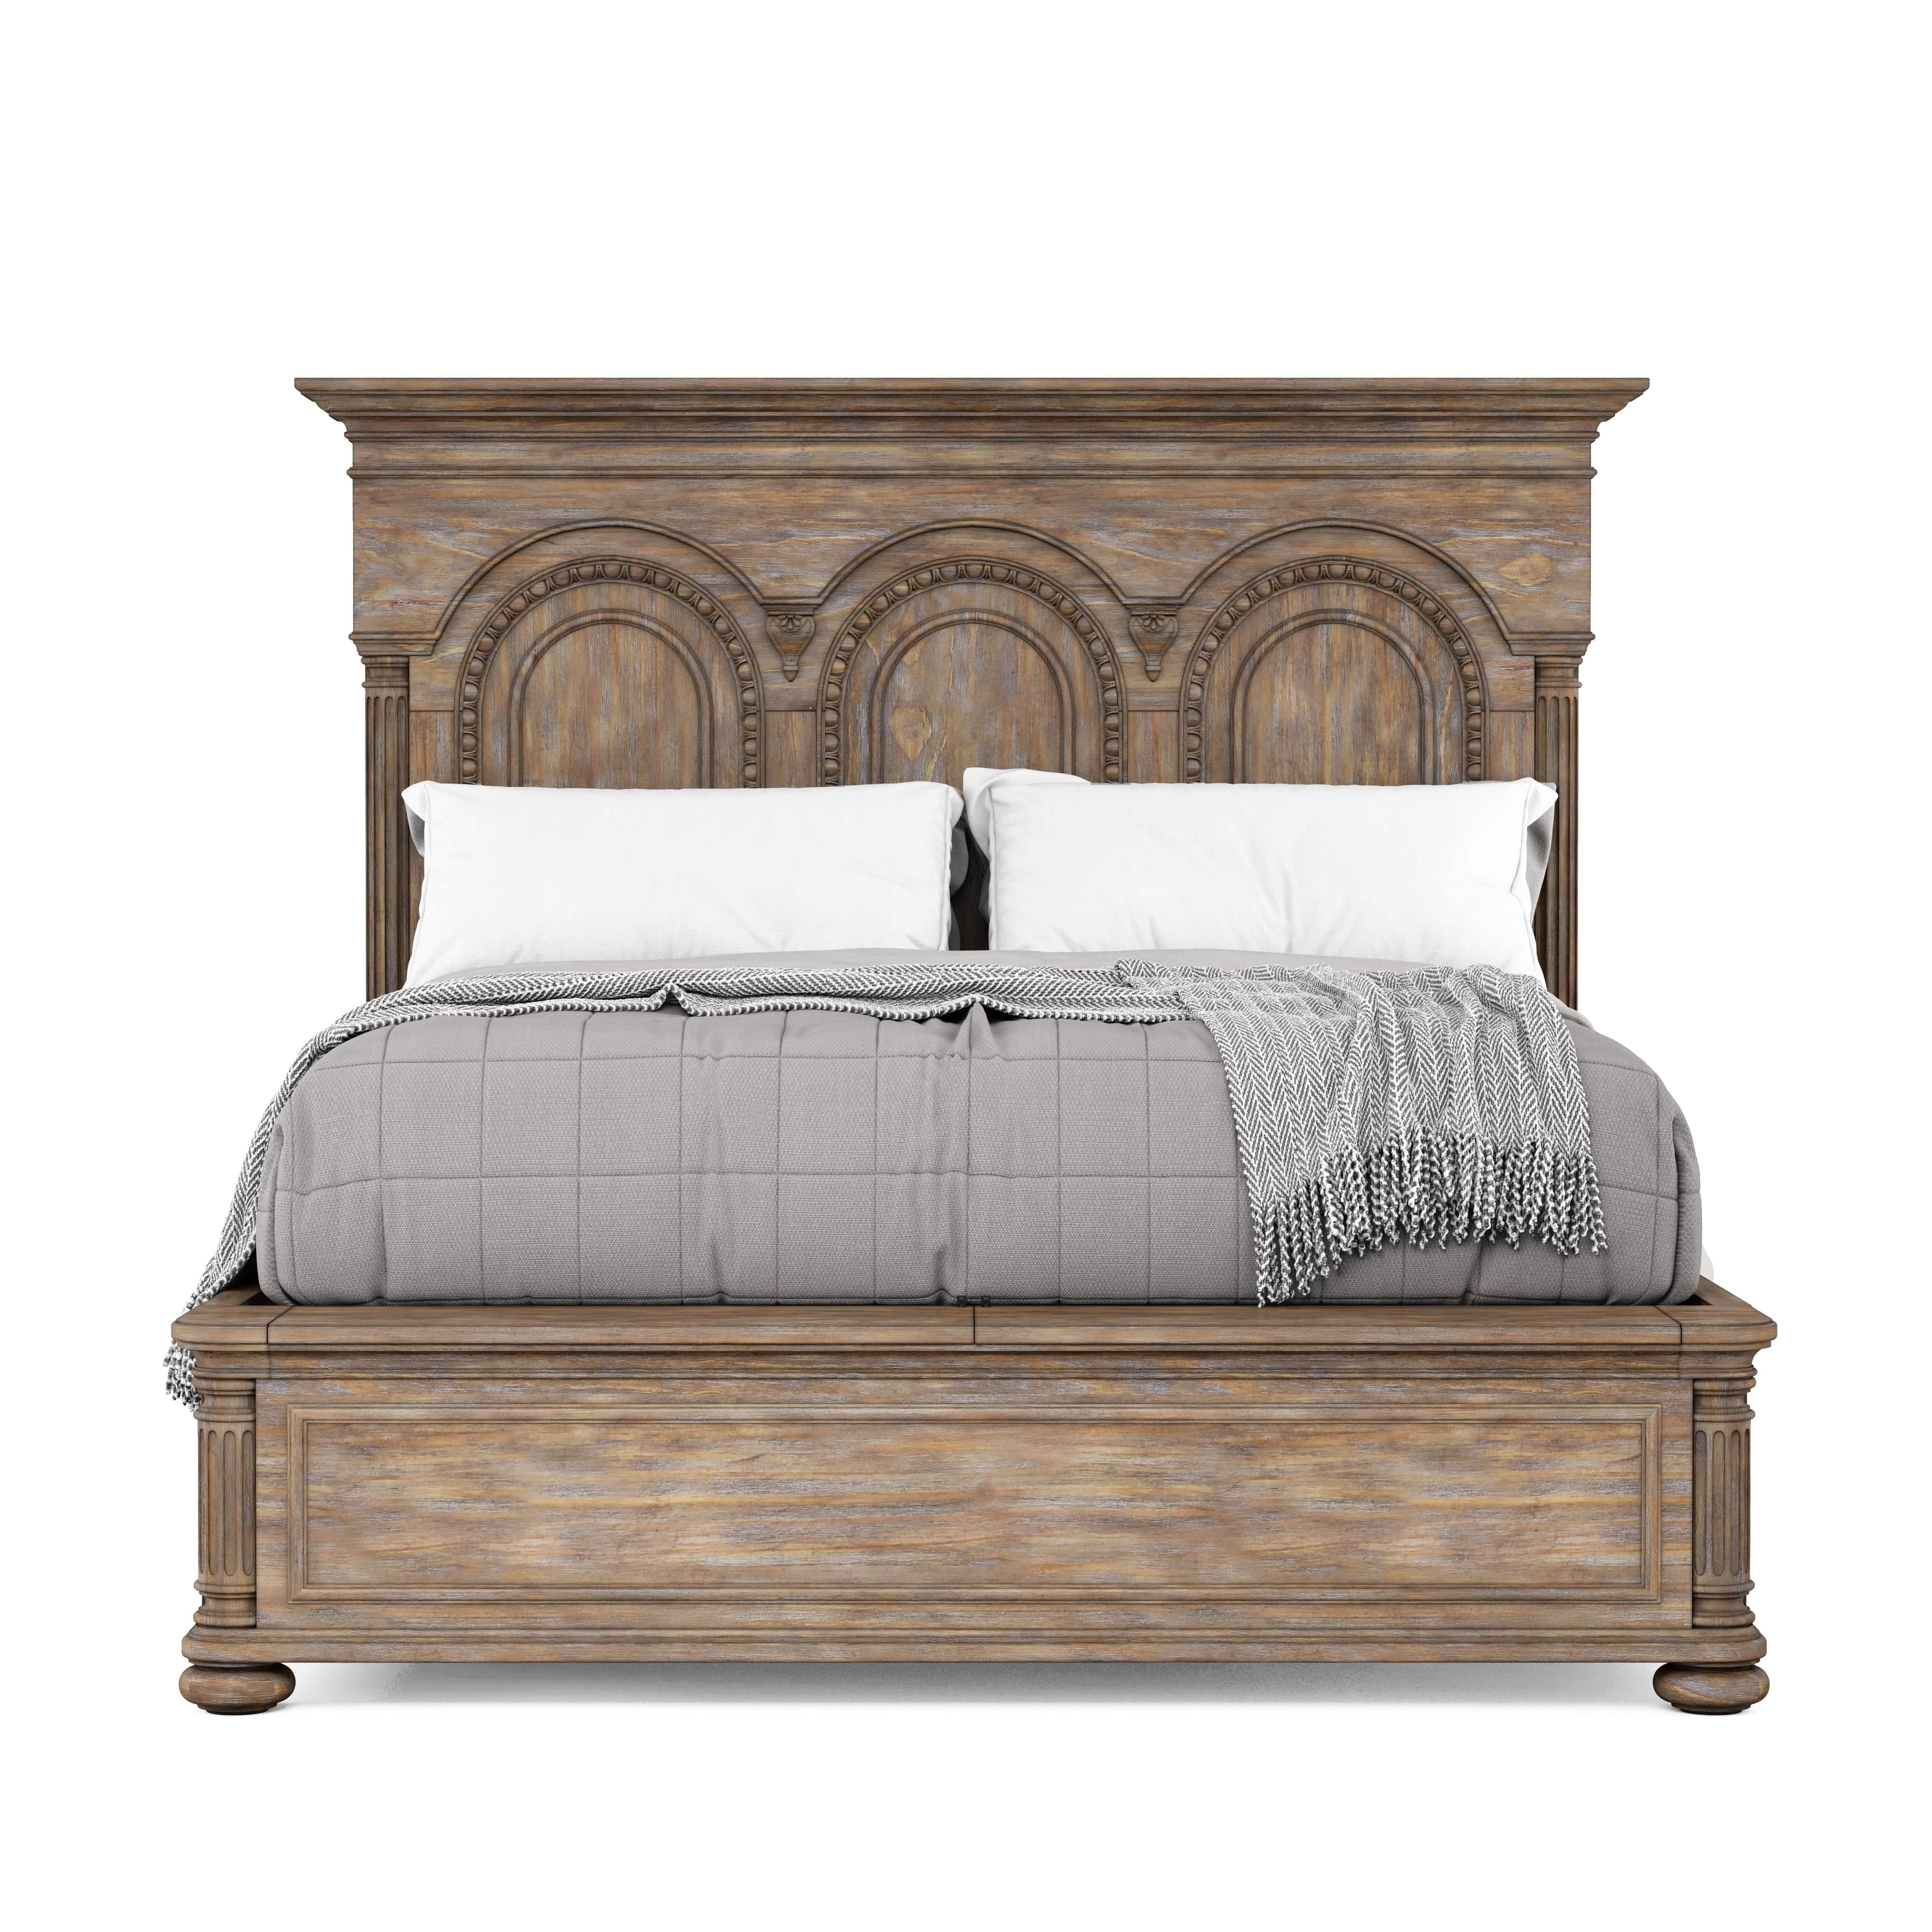 Traditional, Farmhouse Panel Bed Architrave 277135-2608 in Brown 